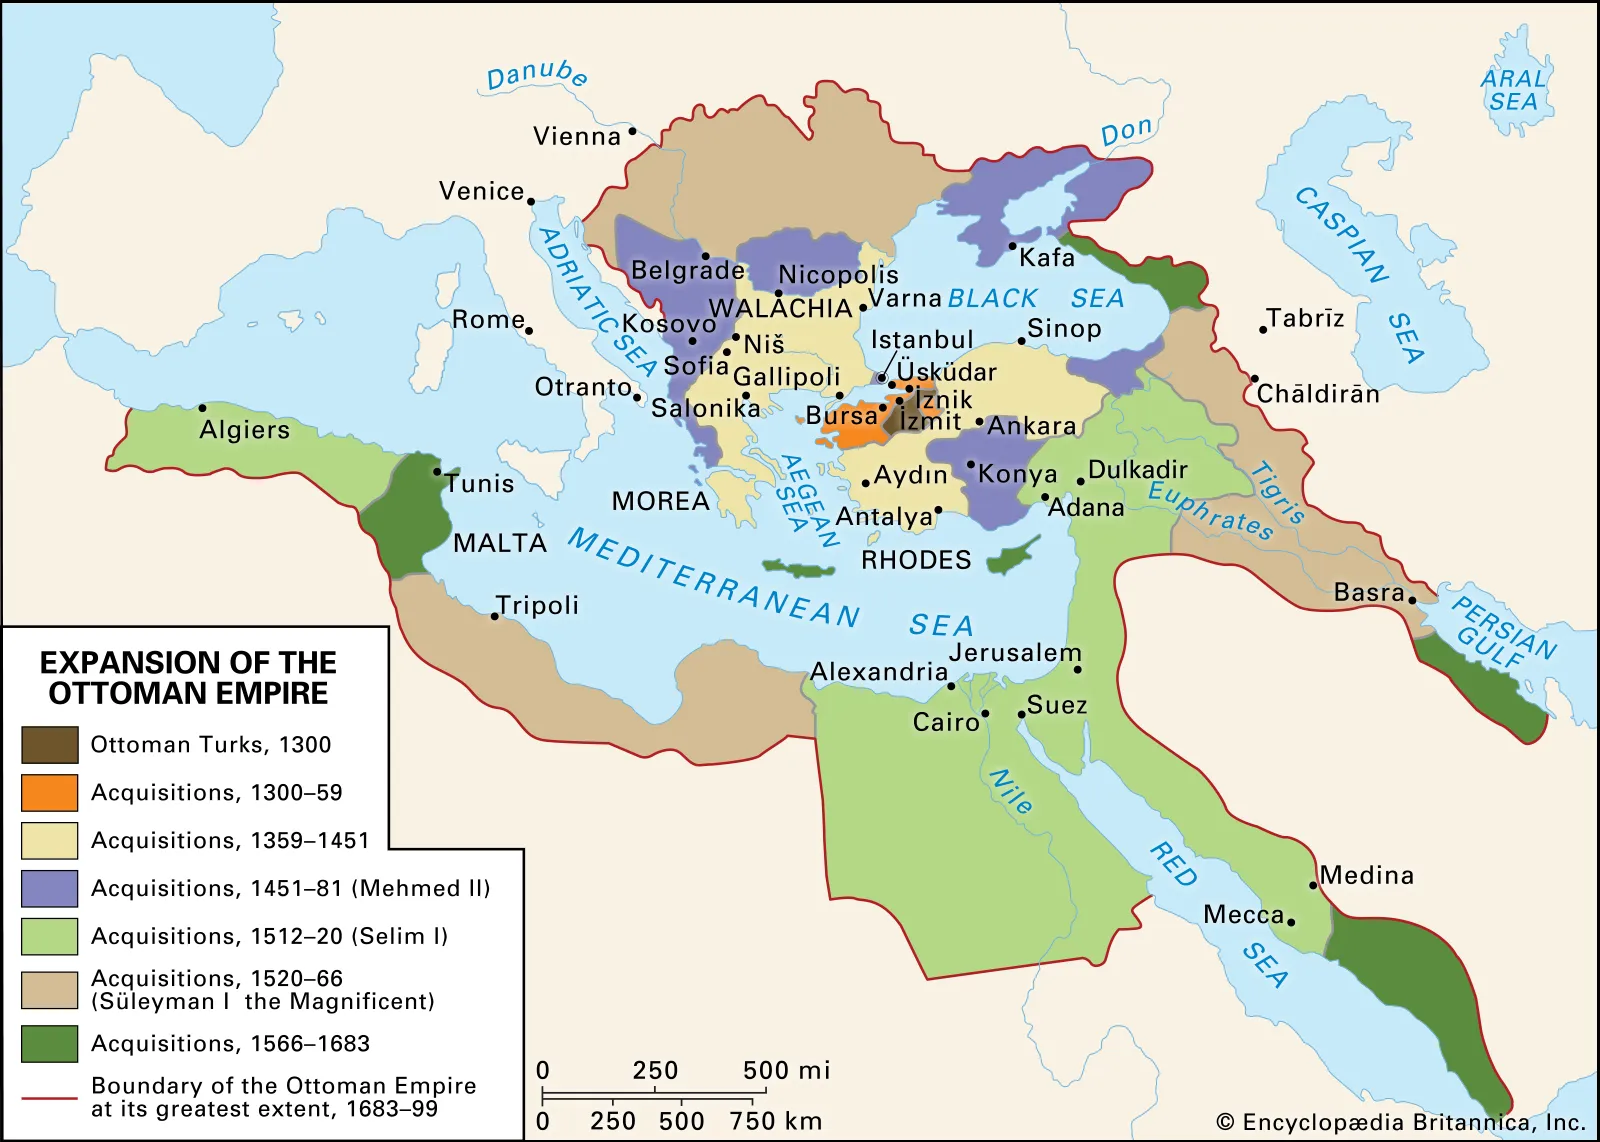 <p>A Turkish sultanate that had migrated into Anatolia, carving out a state that consisted of southwestern Asia, northeastern Africa and the Balkans, bringing long-term political unity to the Middle East and North Africa. During the 16th century, the Ottoman Empire extended its control to the Middle East, Egypt, coastal North Africa, the lands around the Black Sea, and Eastern Europe, and it lasted in one form or another from the 14th to early 20th century. The Ottoman Empire brought cultural, political, and economic significance that only the Incas and Ming dynasty China could rival.</p>